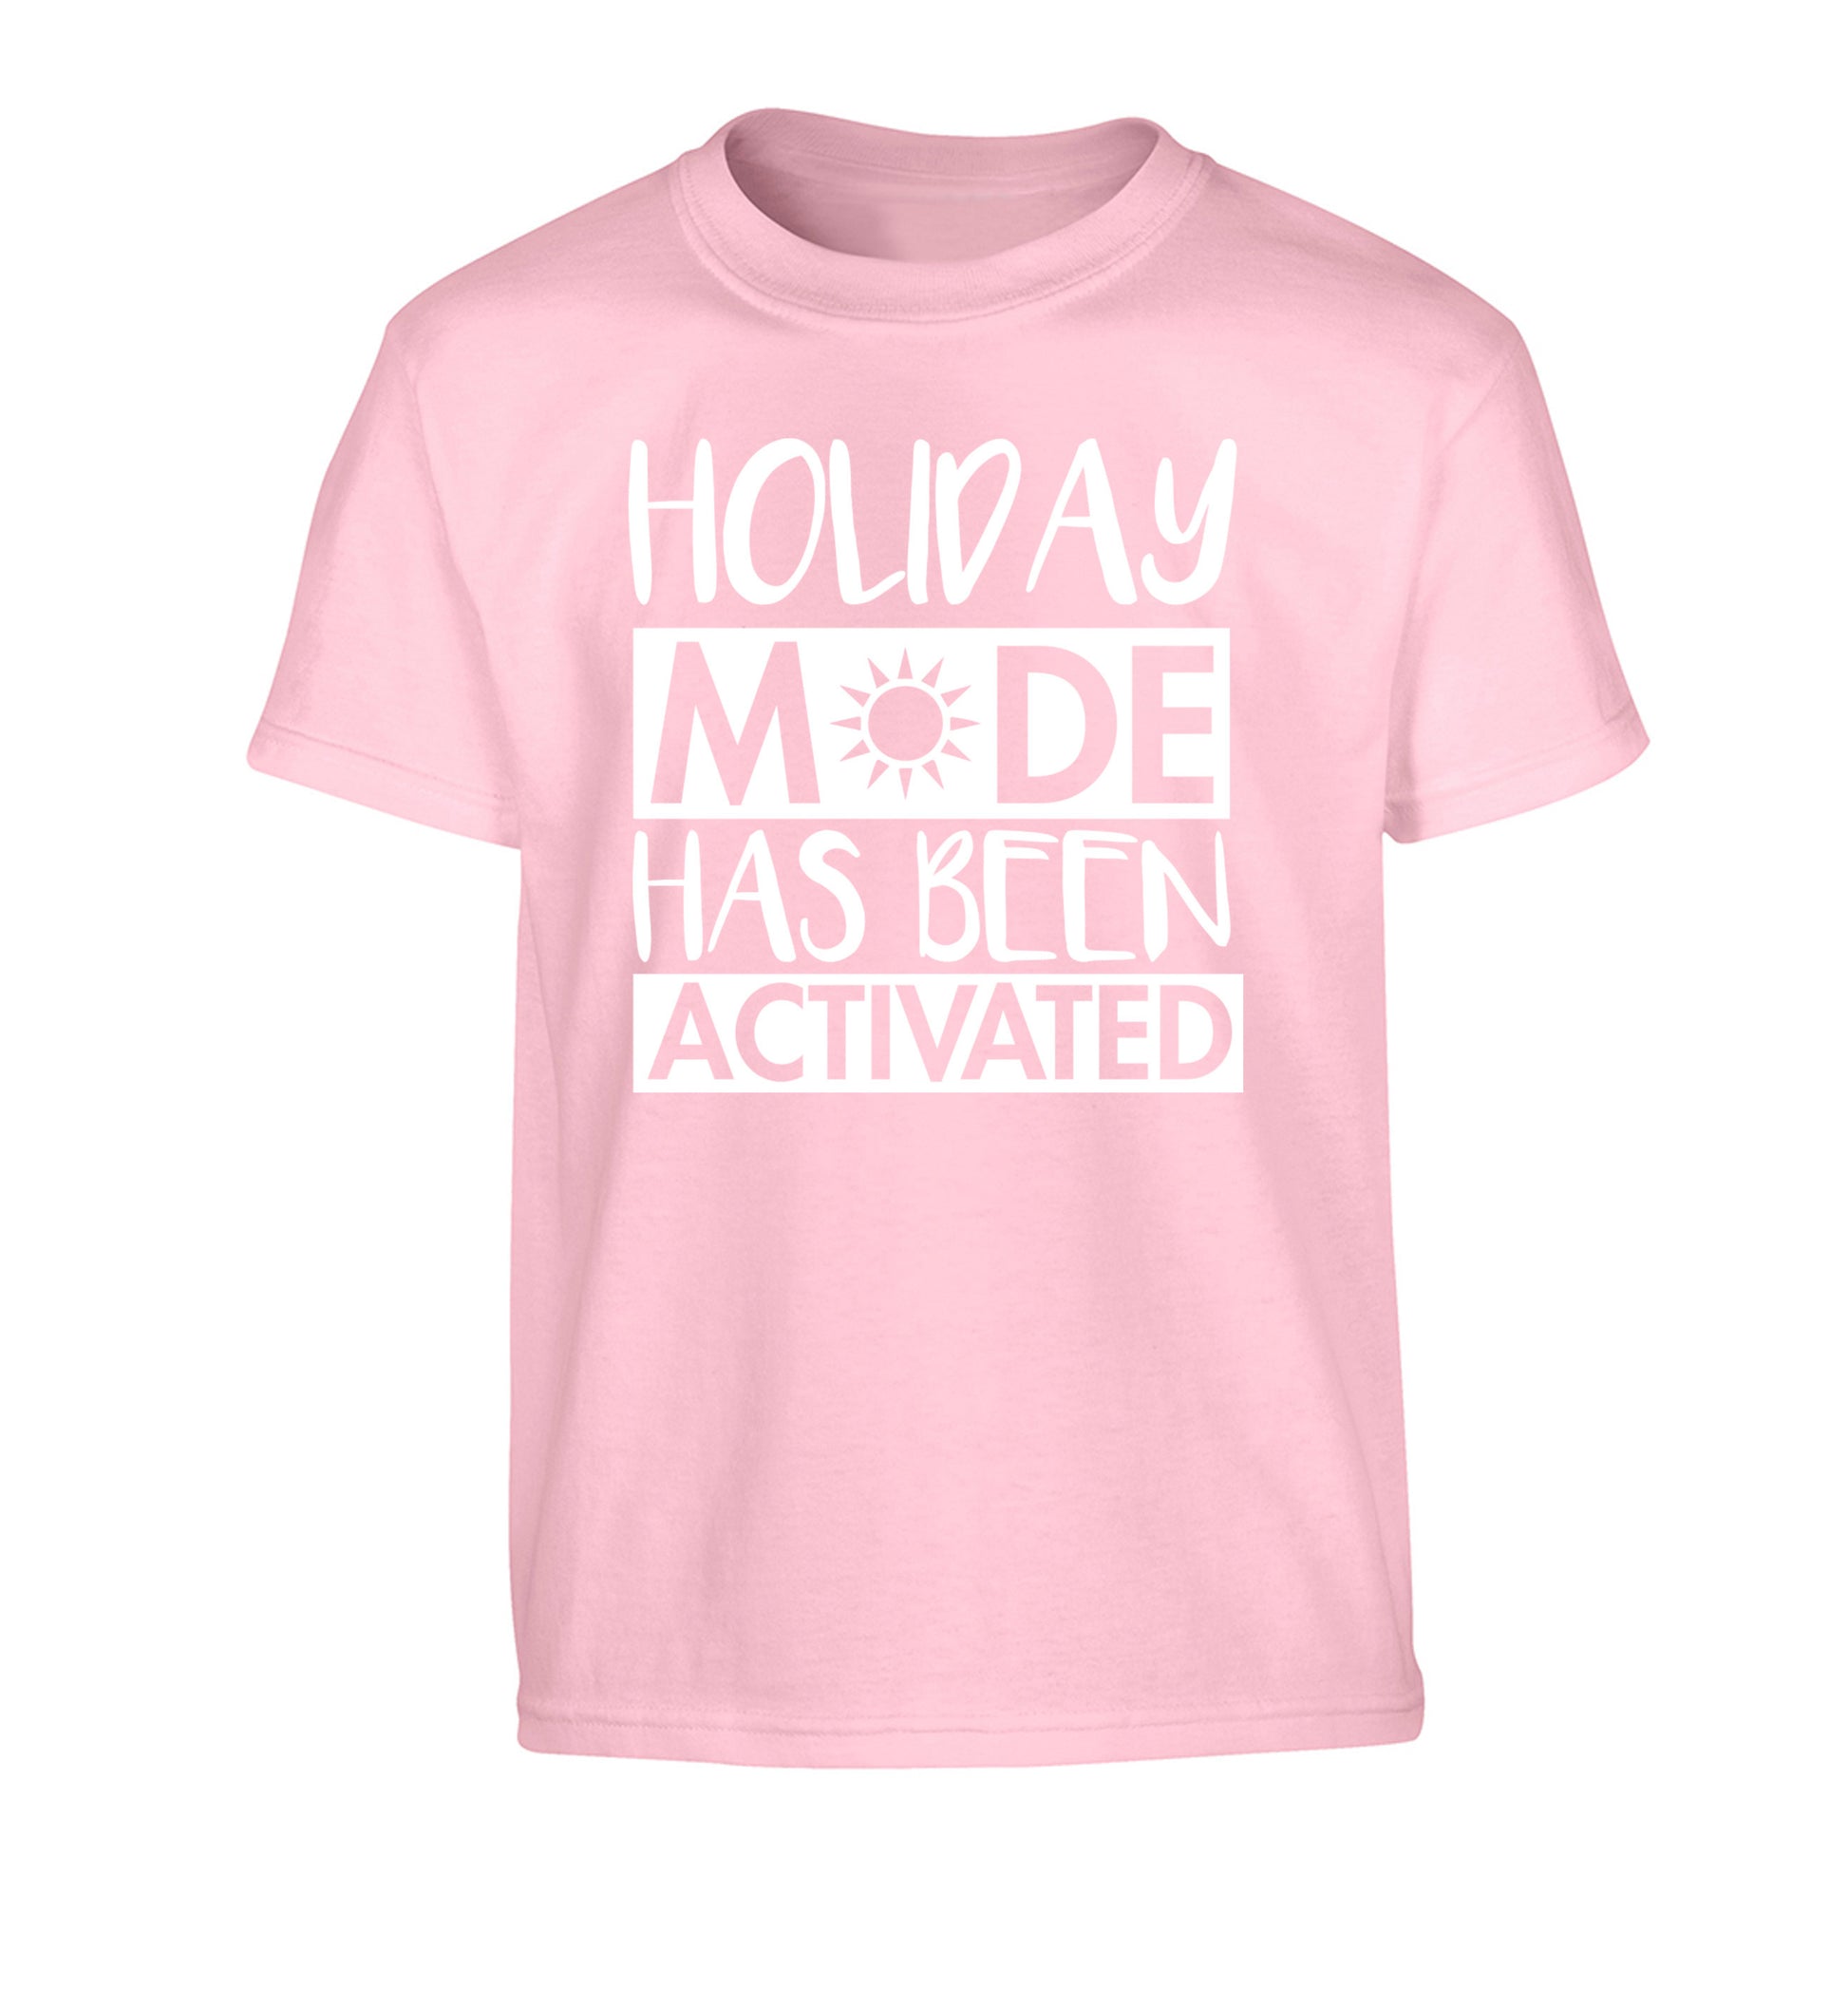 Holiday mode has been activated Children's light pink Tshirt 12-14 Years